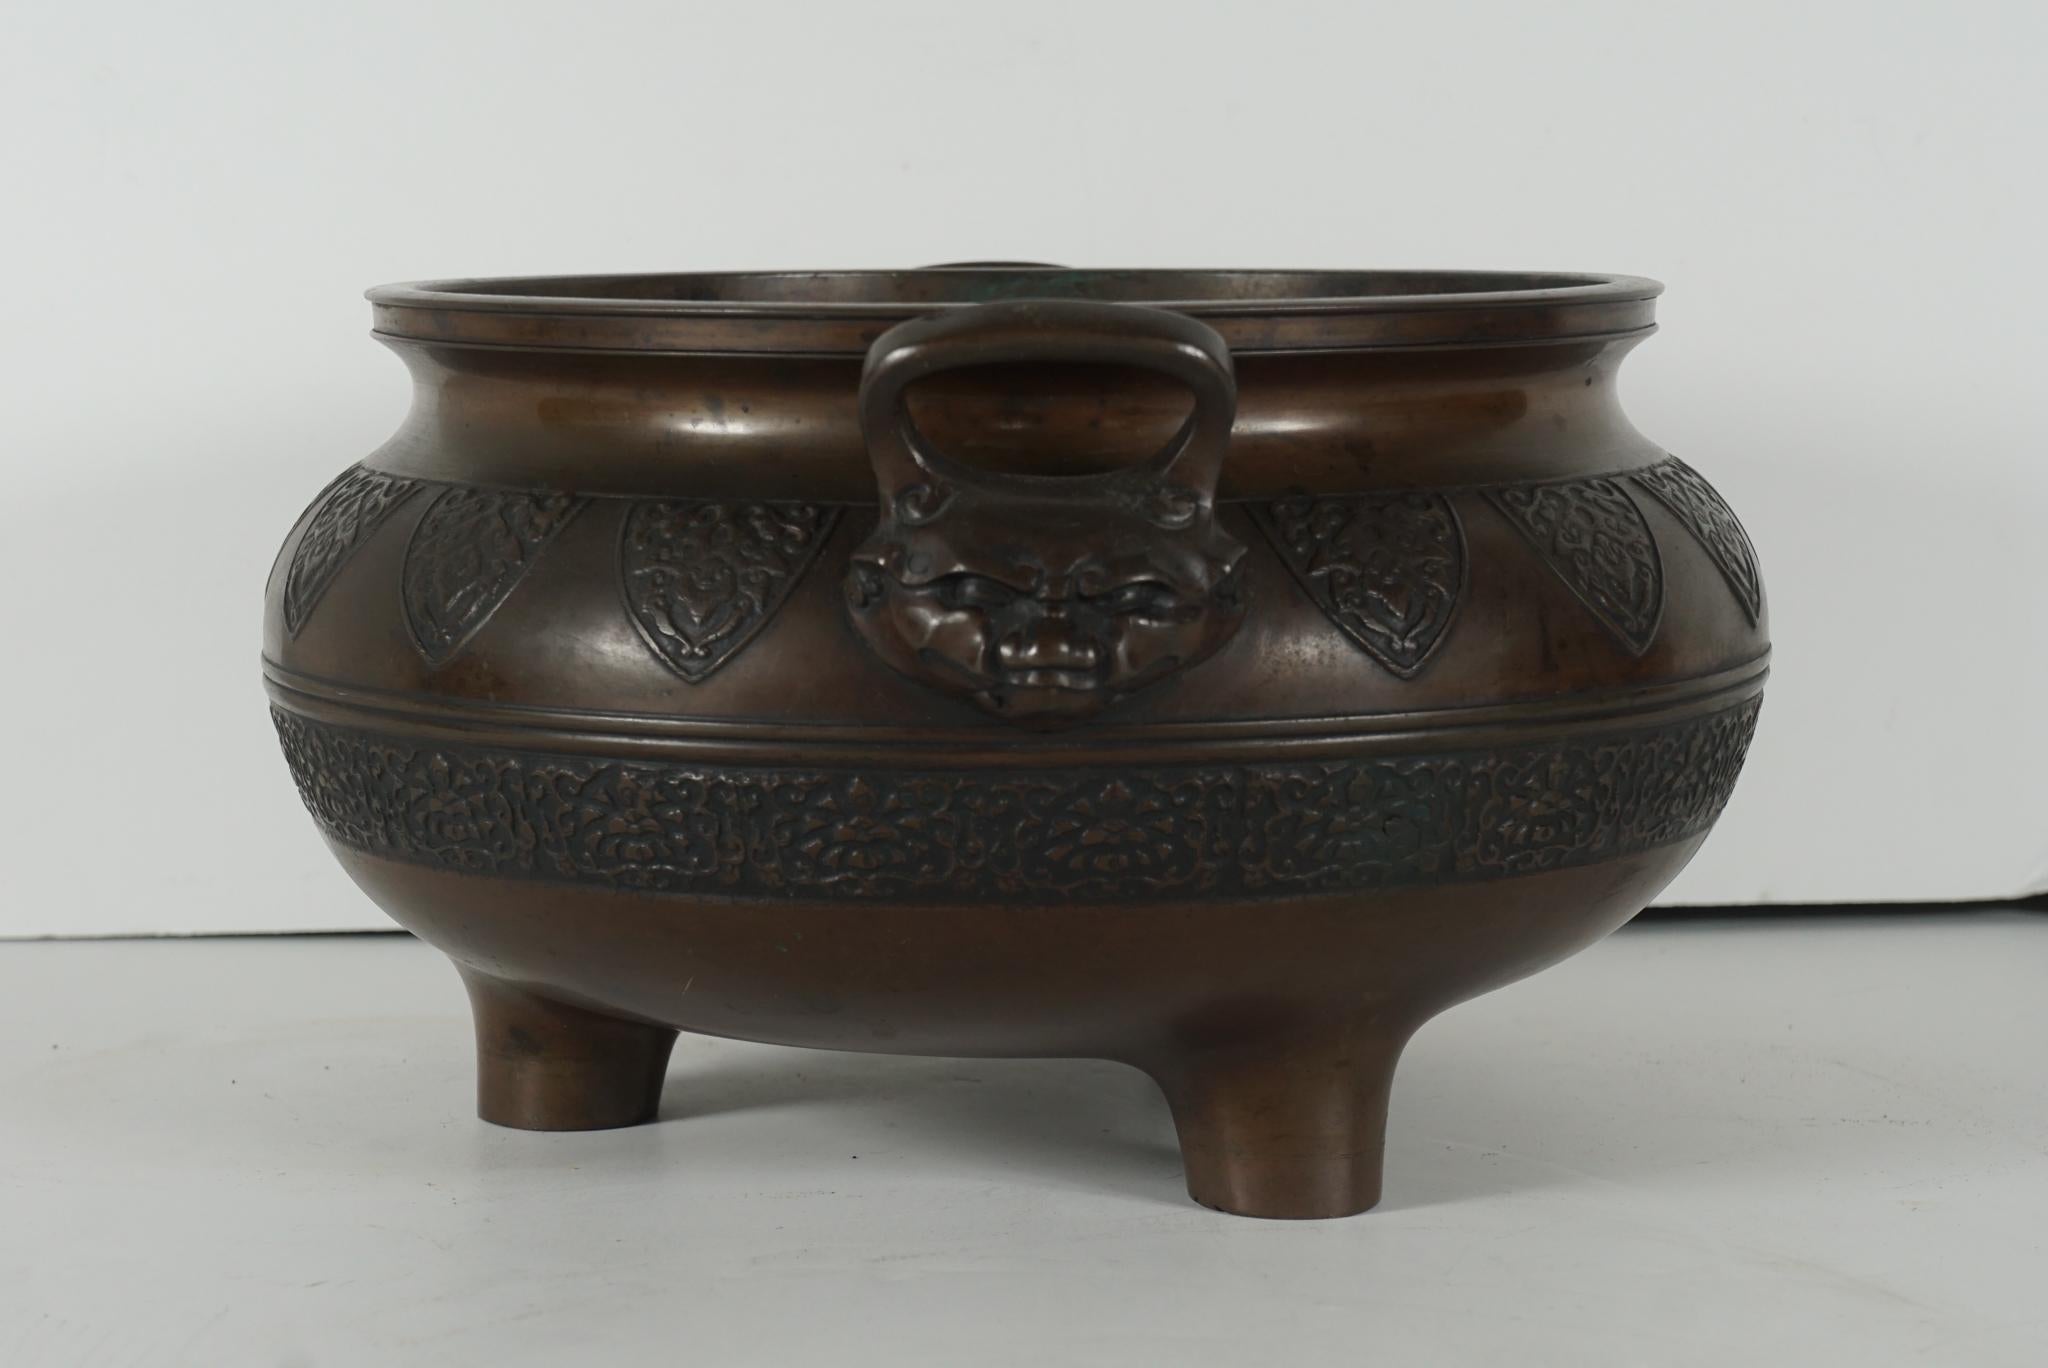 This nicely cast Asian late 19th-century bronze censer would have been used in a fine home or public space as an honored element for the shrine it sat upon. Made circa 1870-1880 the casting is simple and elegant consisting of the pot-bellied form